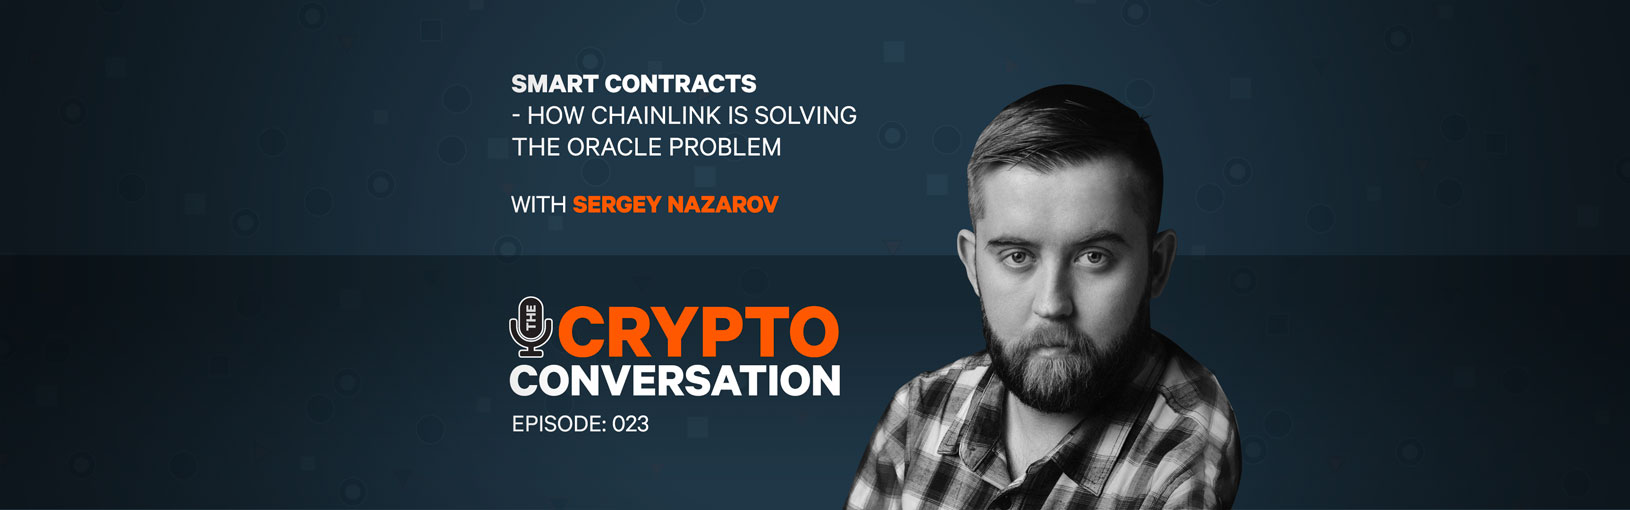 Smart Contracts – How Sergey Nazarov and Chainlink are solving the oracle problem